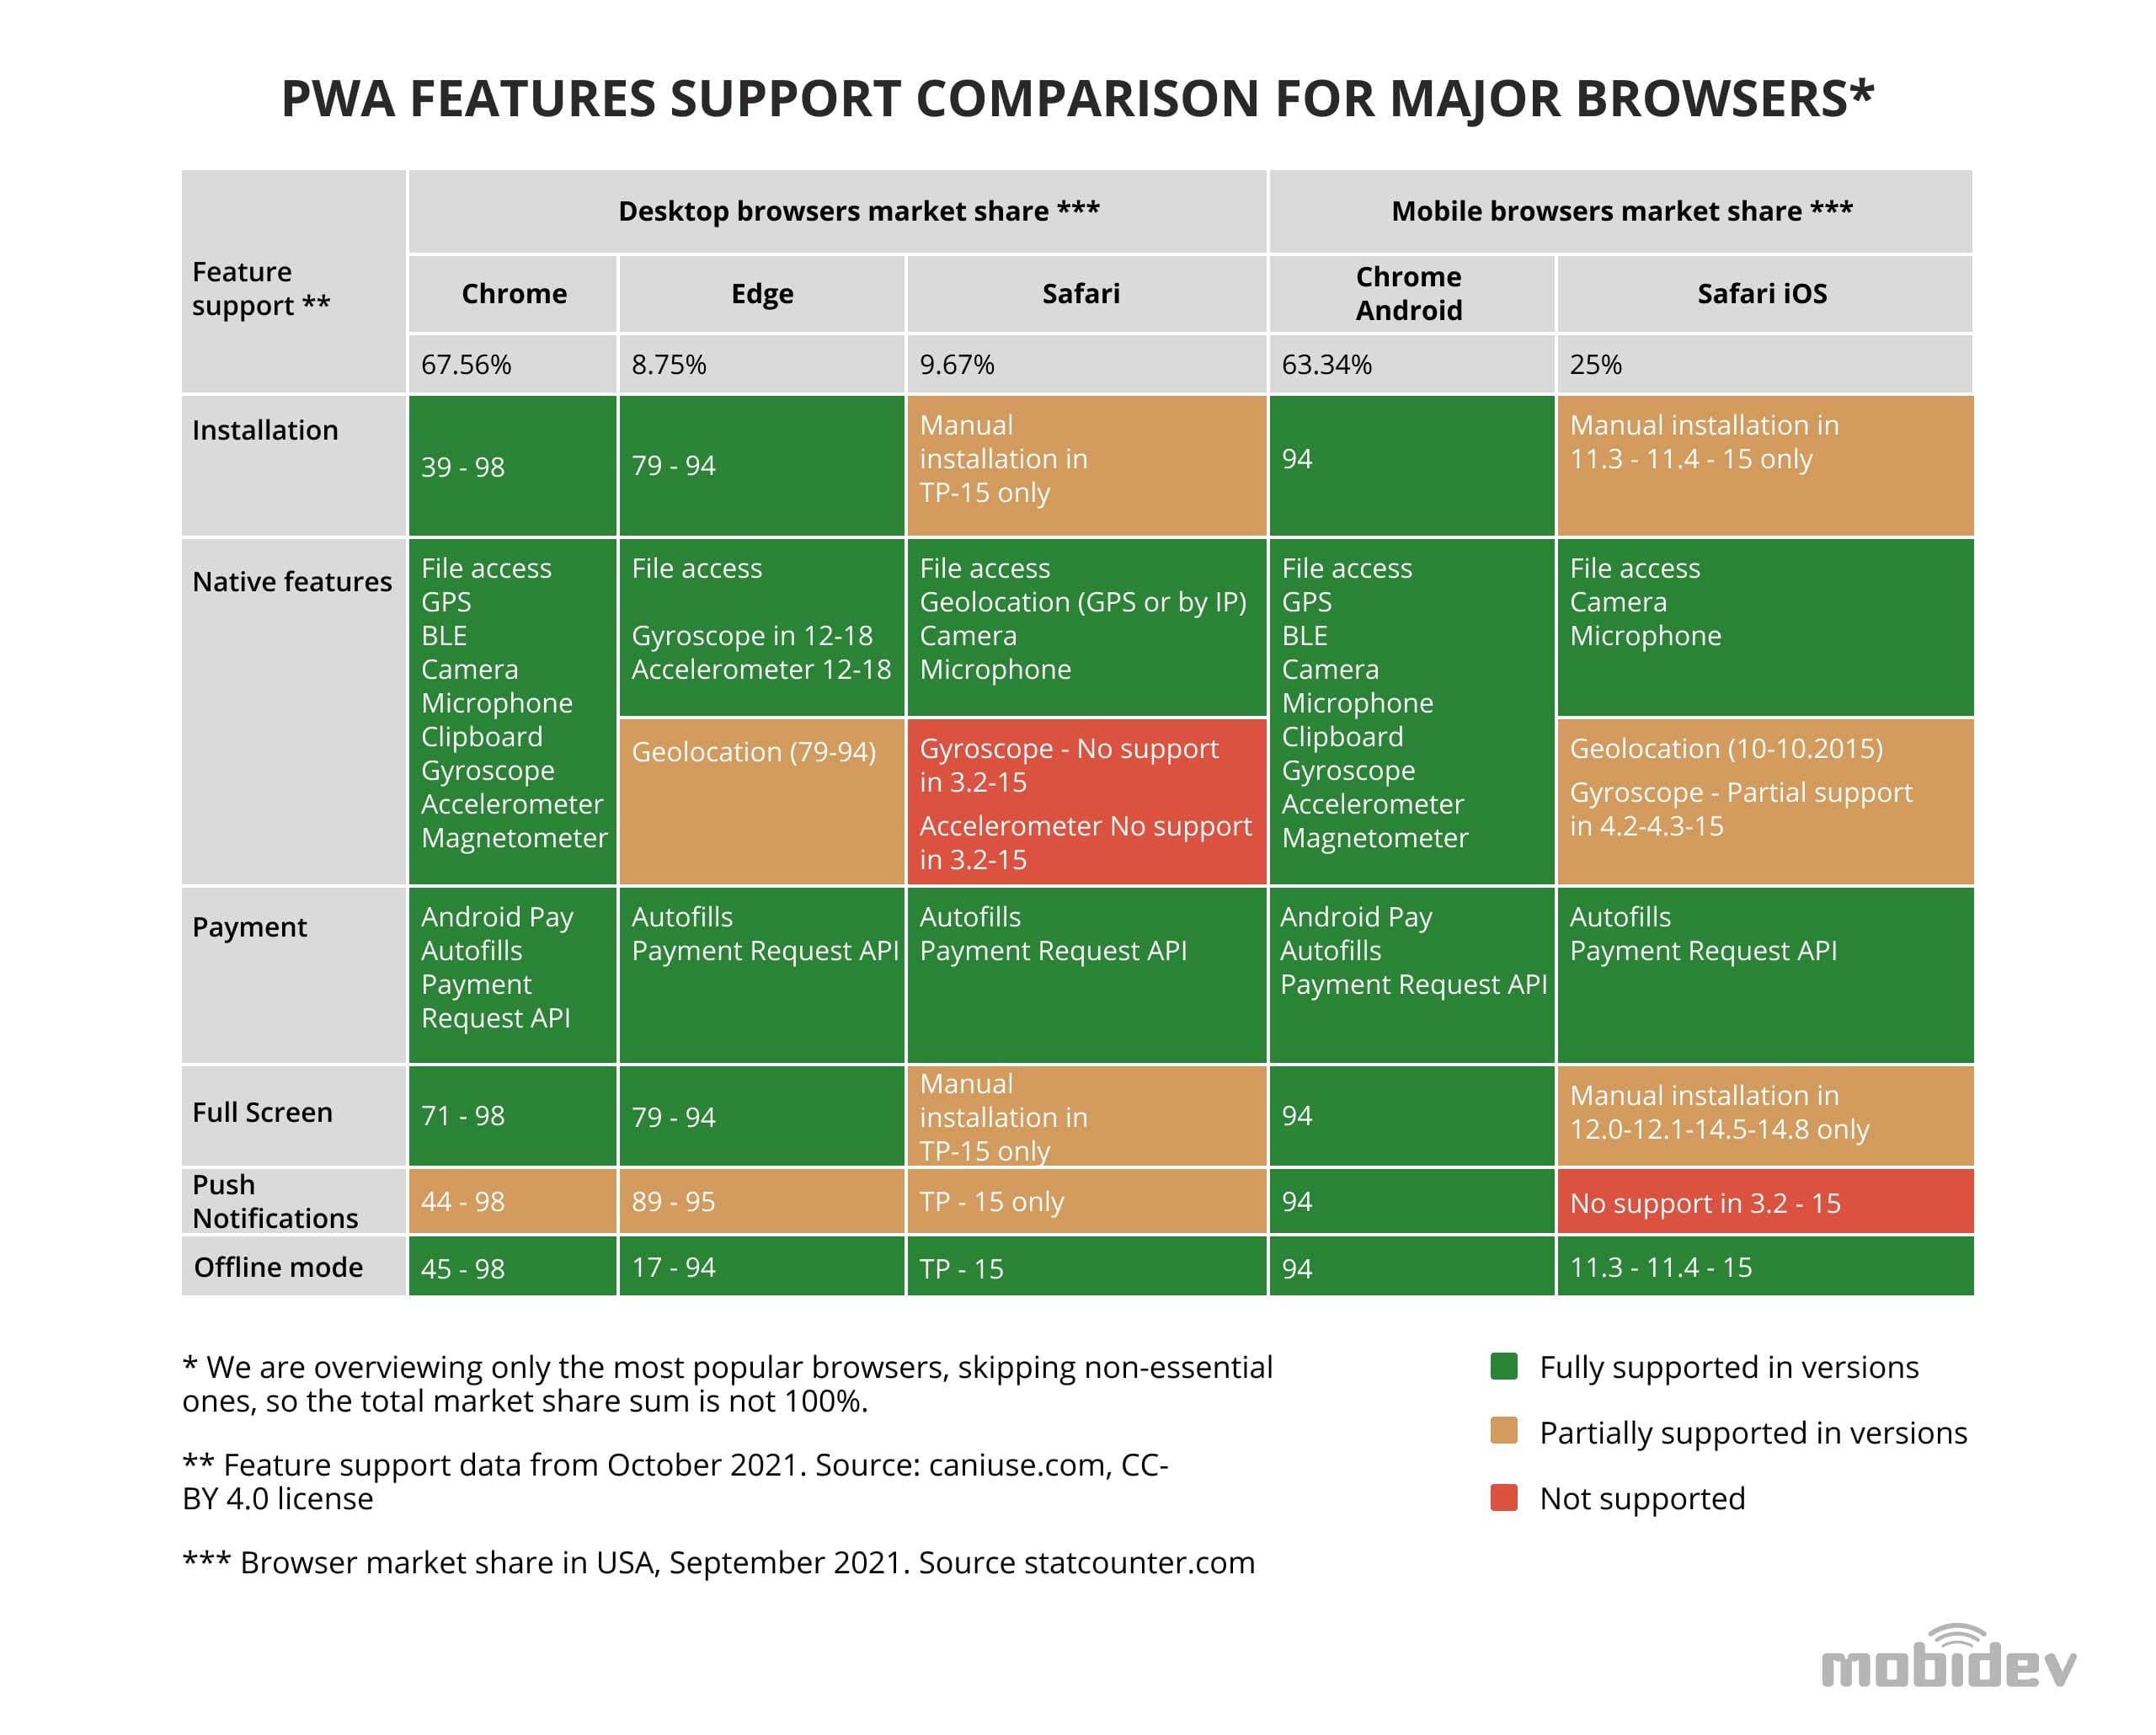 PWA Features Support Comparison for Major Browsers